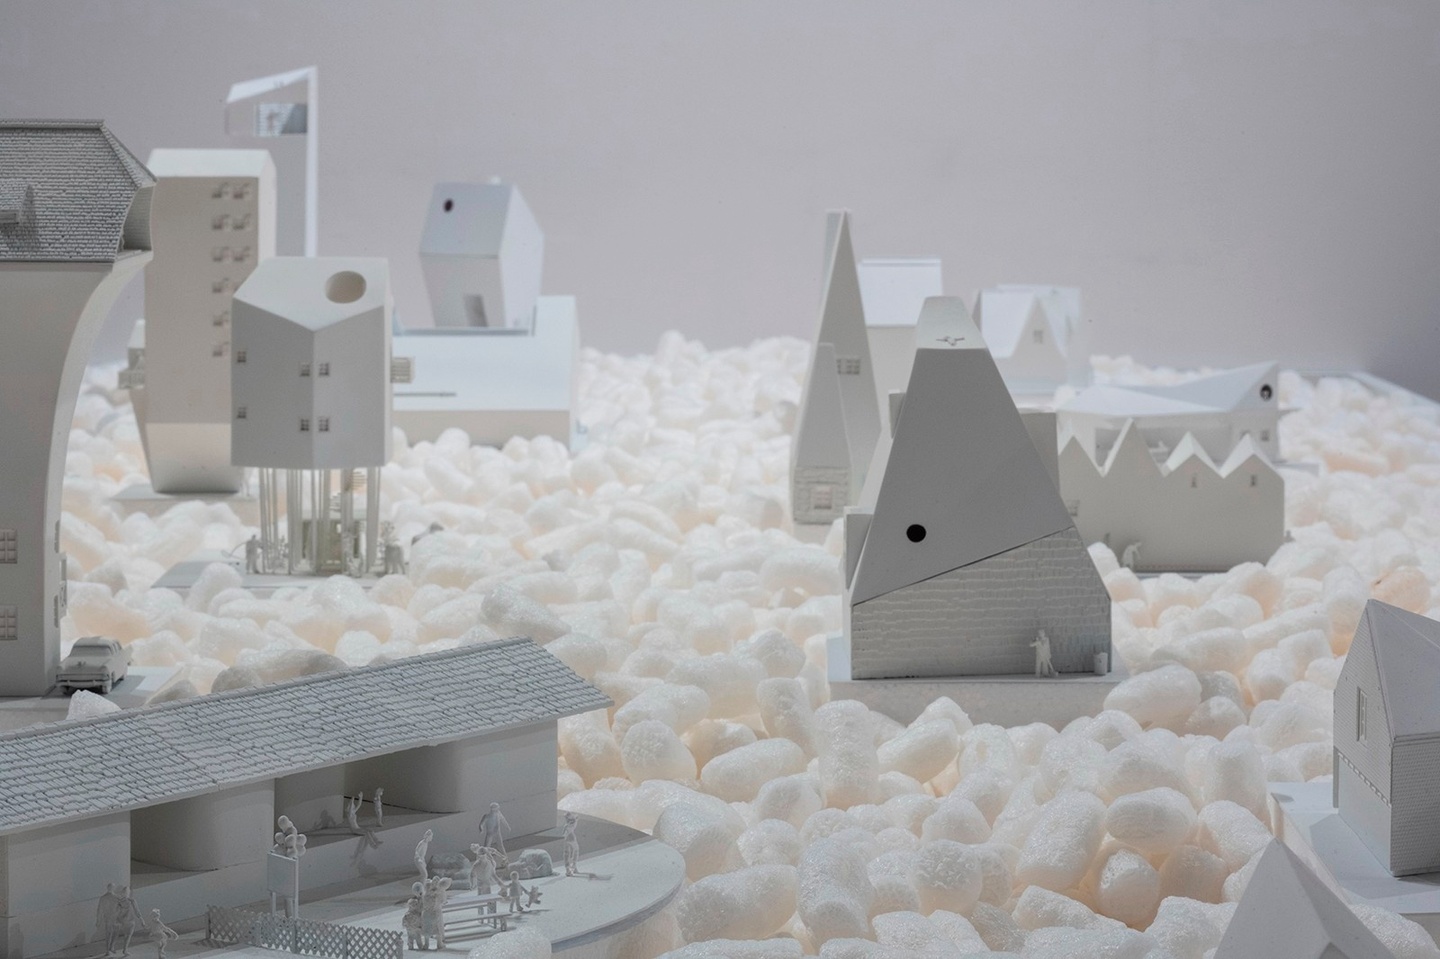 model of all white buildings scattered around surrounded by packing peanuts